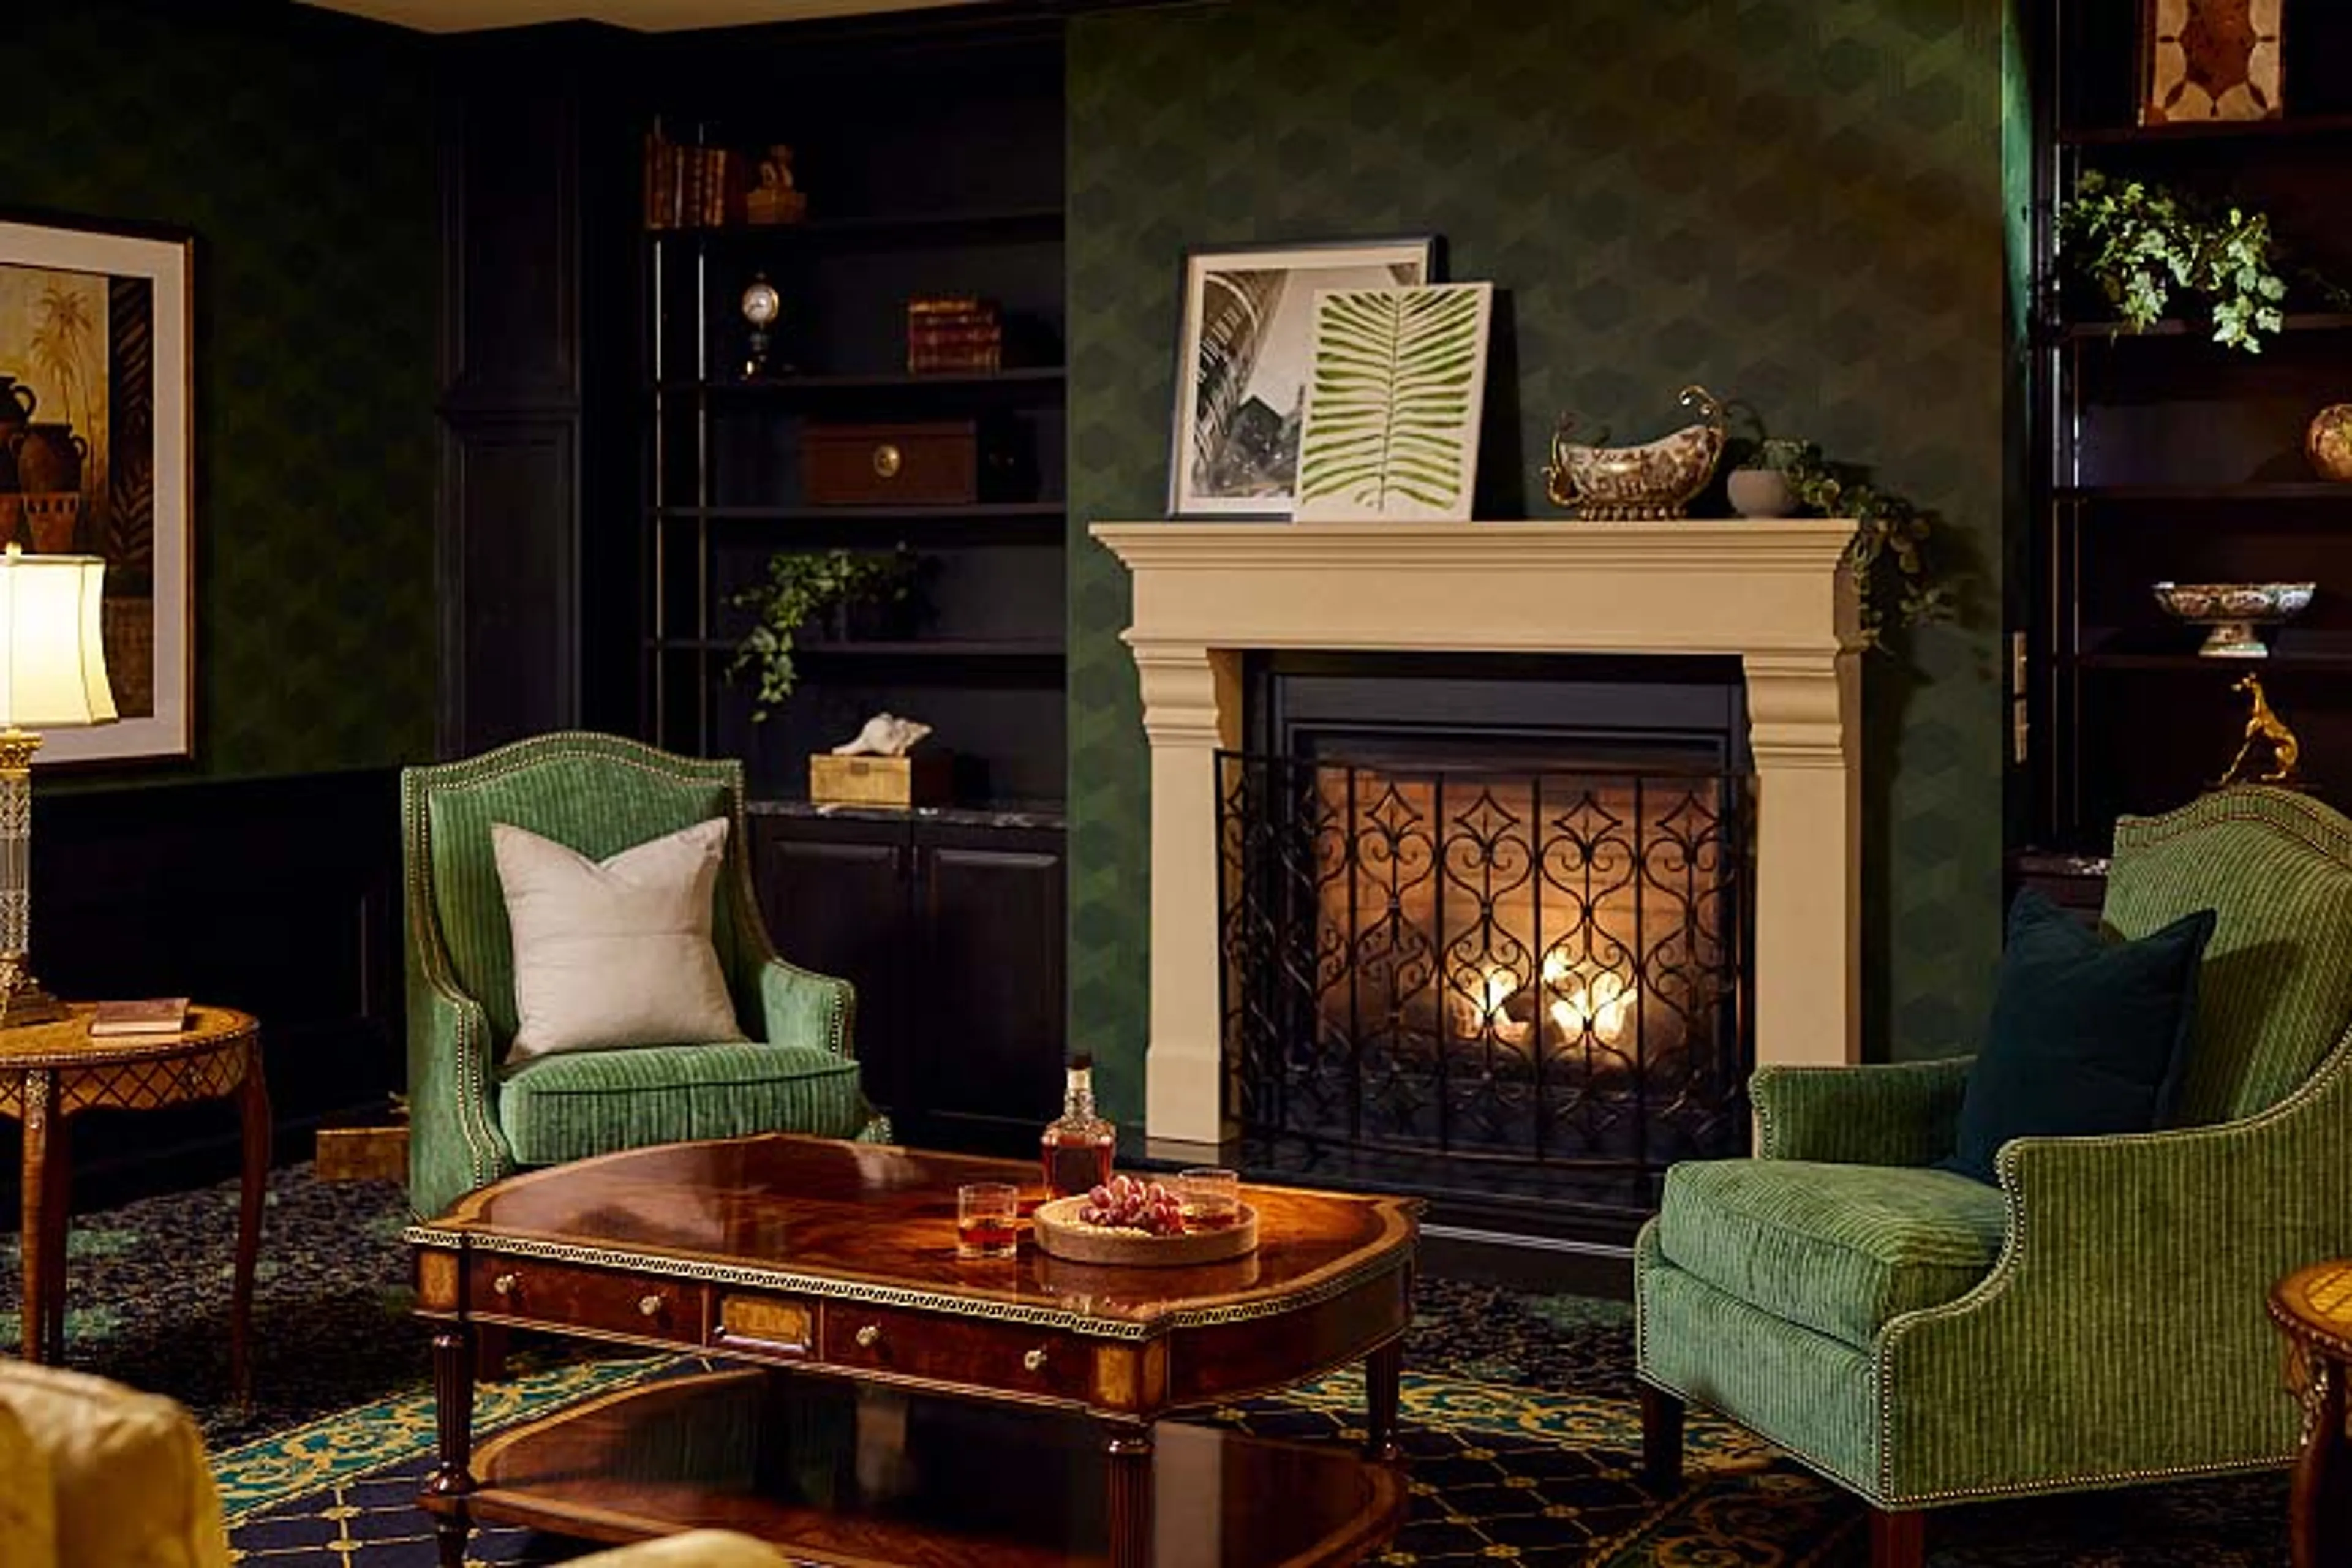 Enjoy a cocktail and snacks while sitting by the fireplace